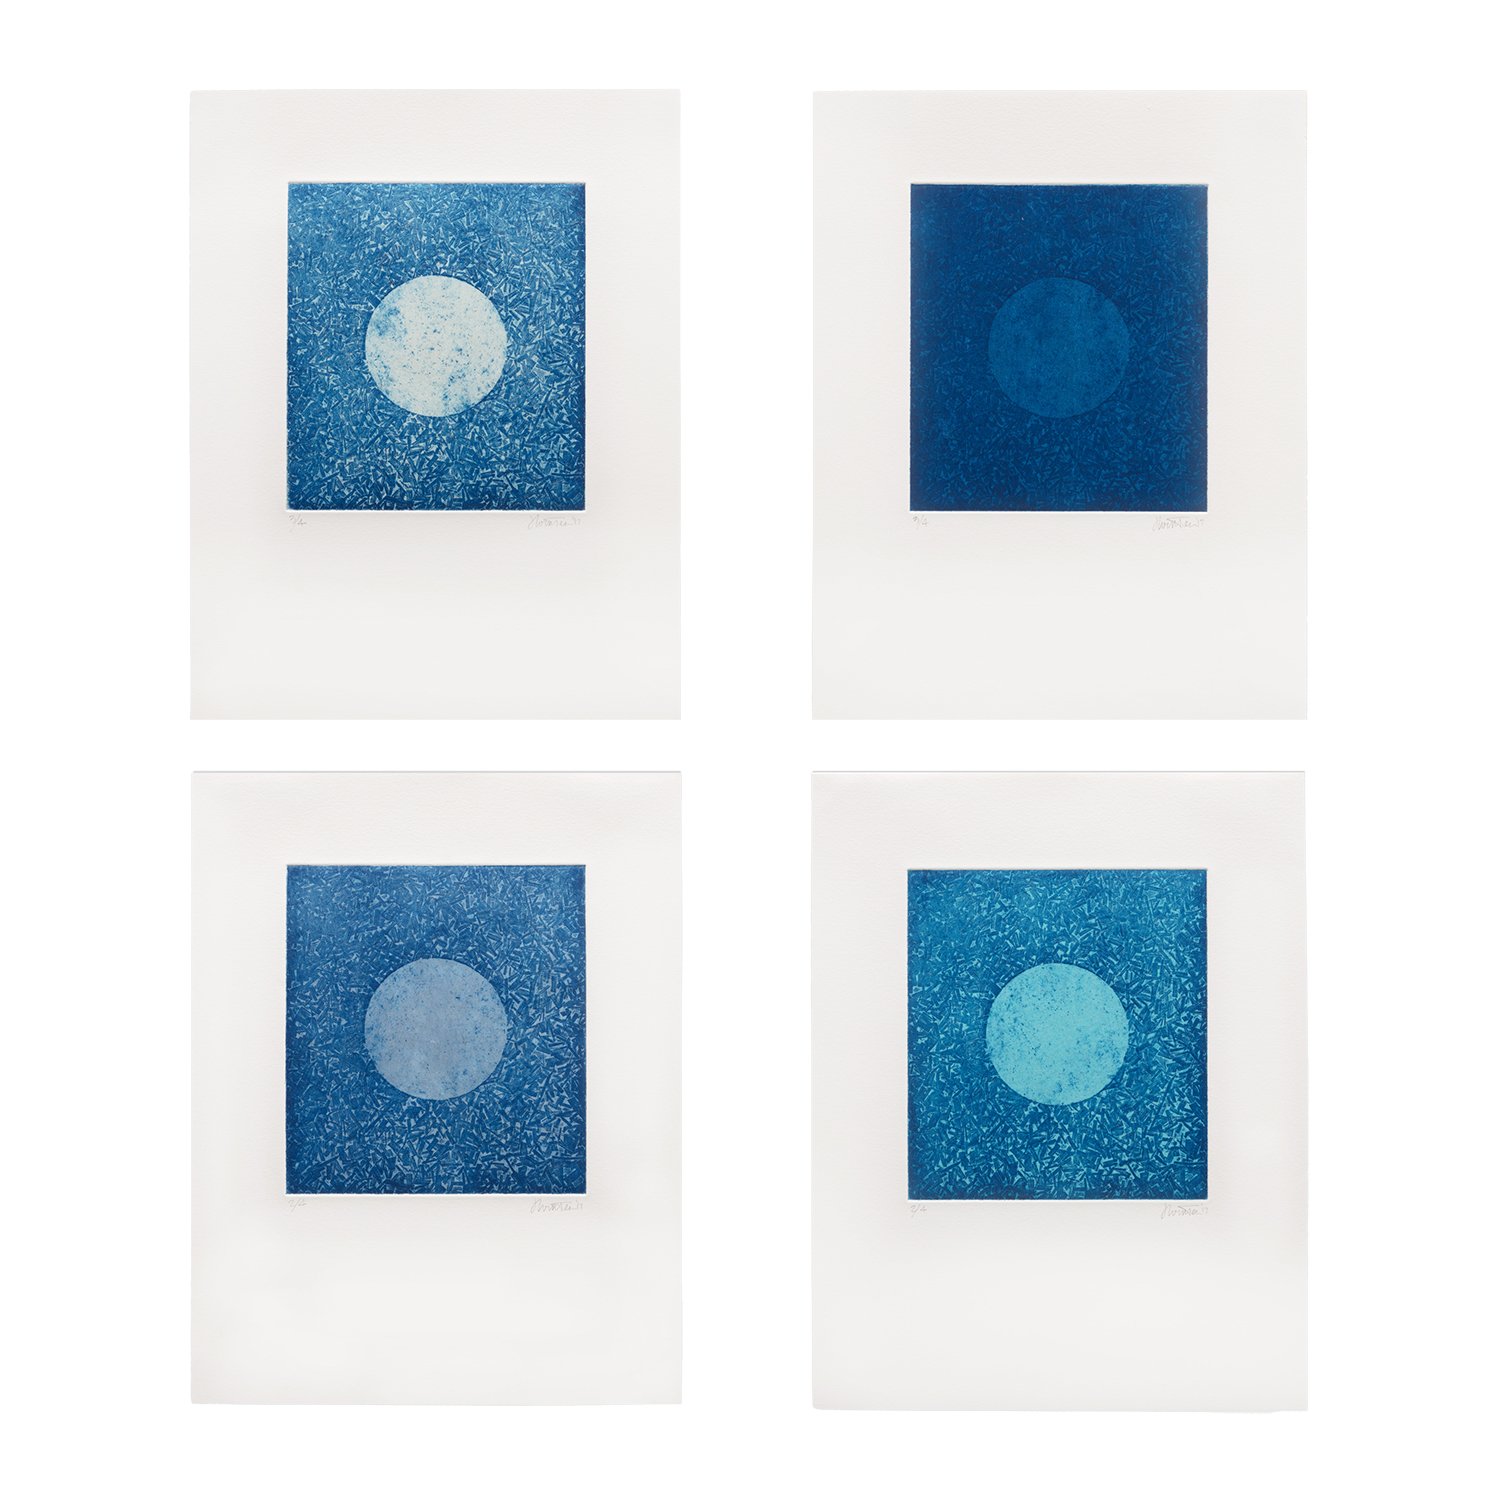  Moon Rising Series, 2018, Edition of 4, Soft Ground Etching with chine colle on BFK paper,  Image Size 7 x 6 inches, Paper Size 13 x 10 inches 